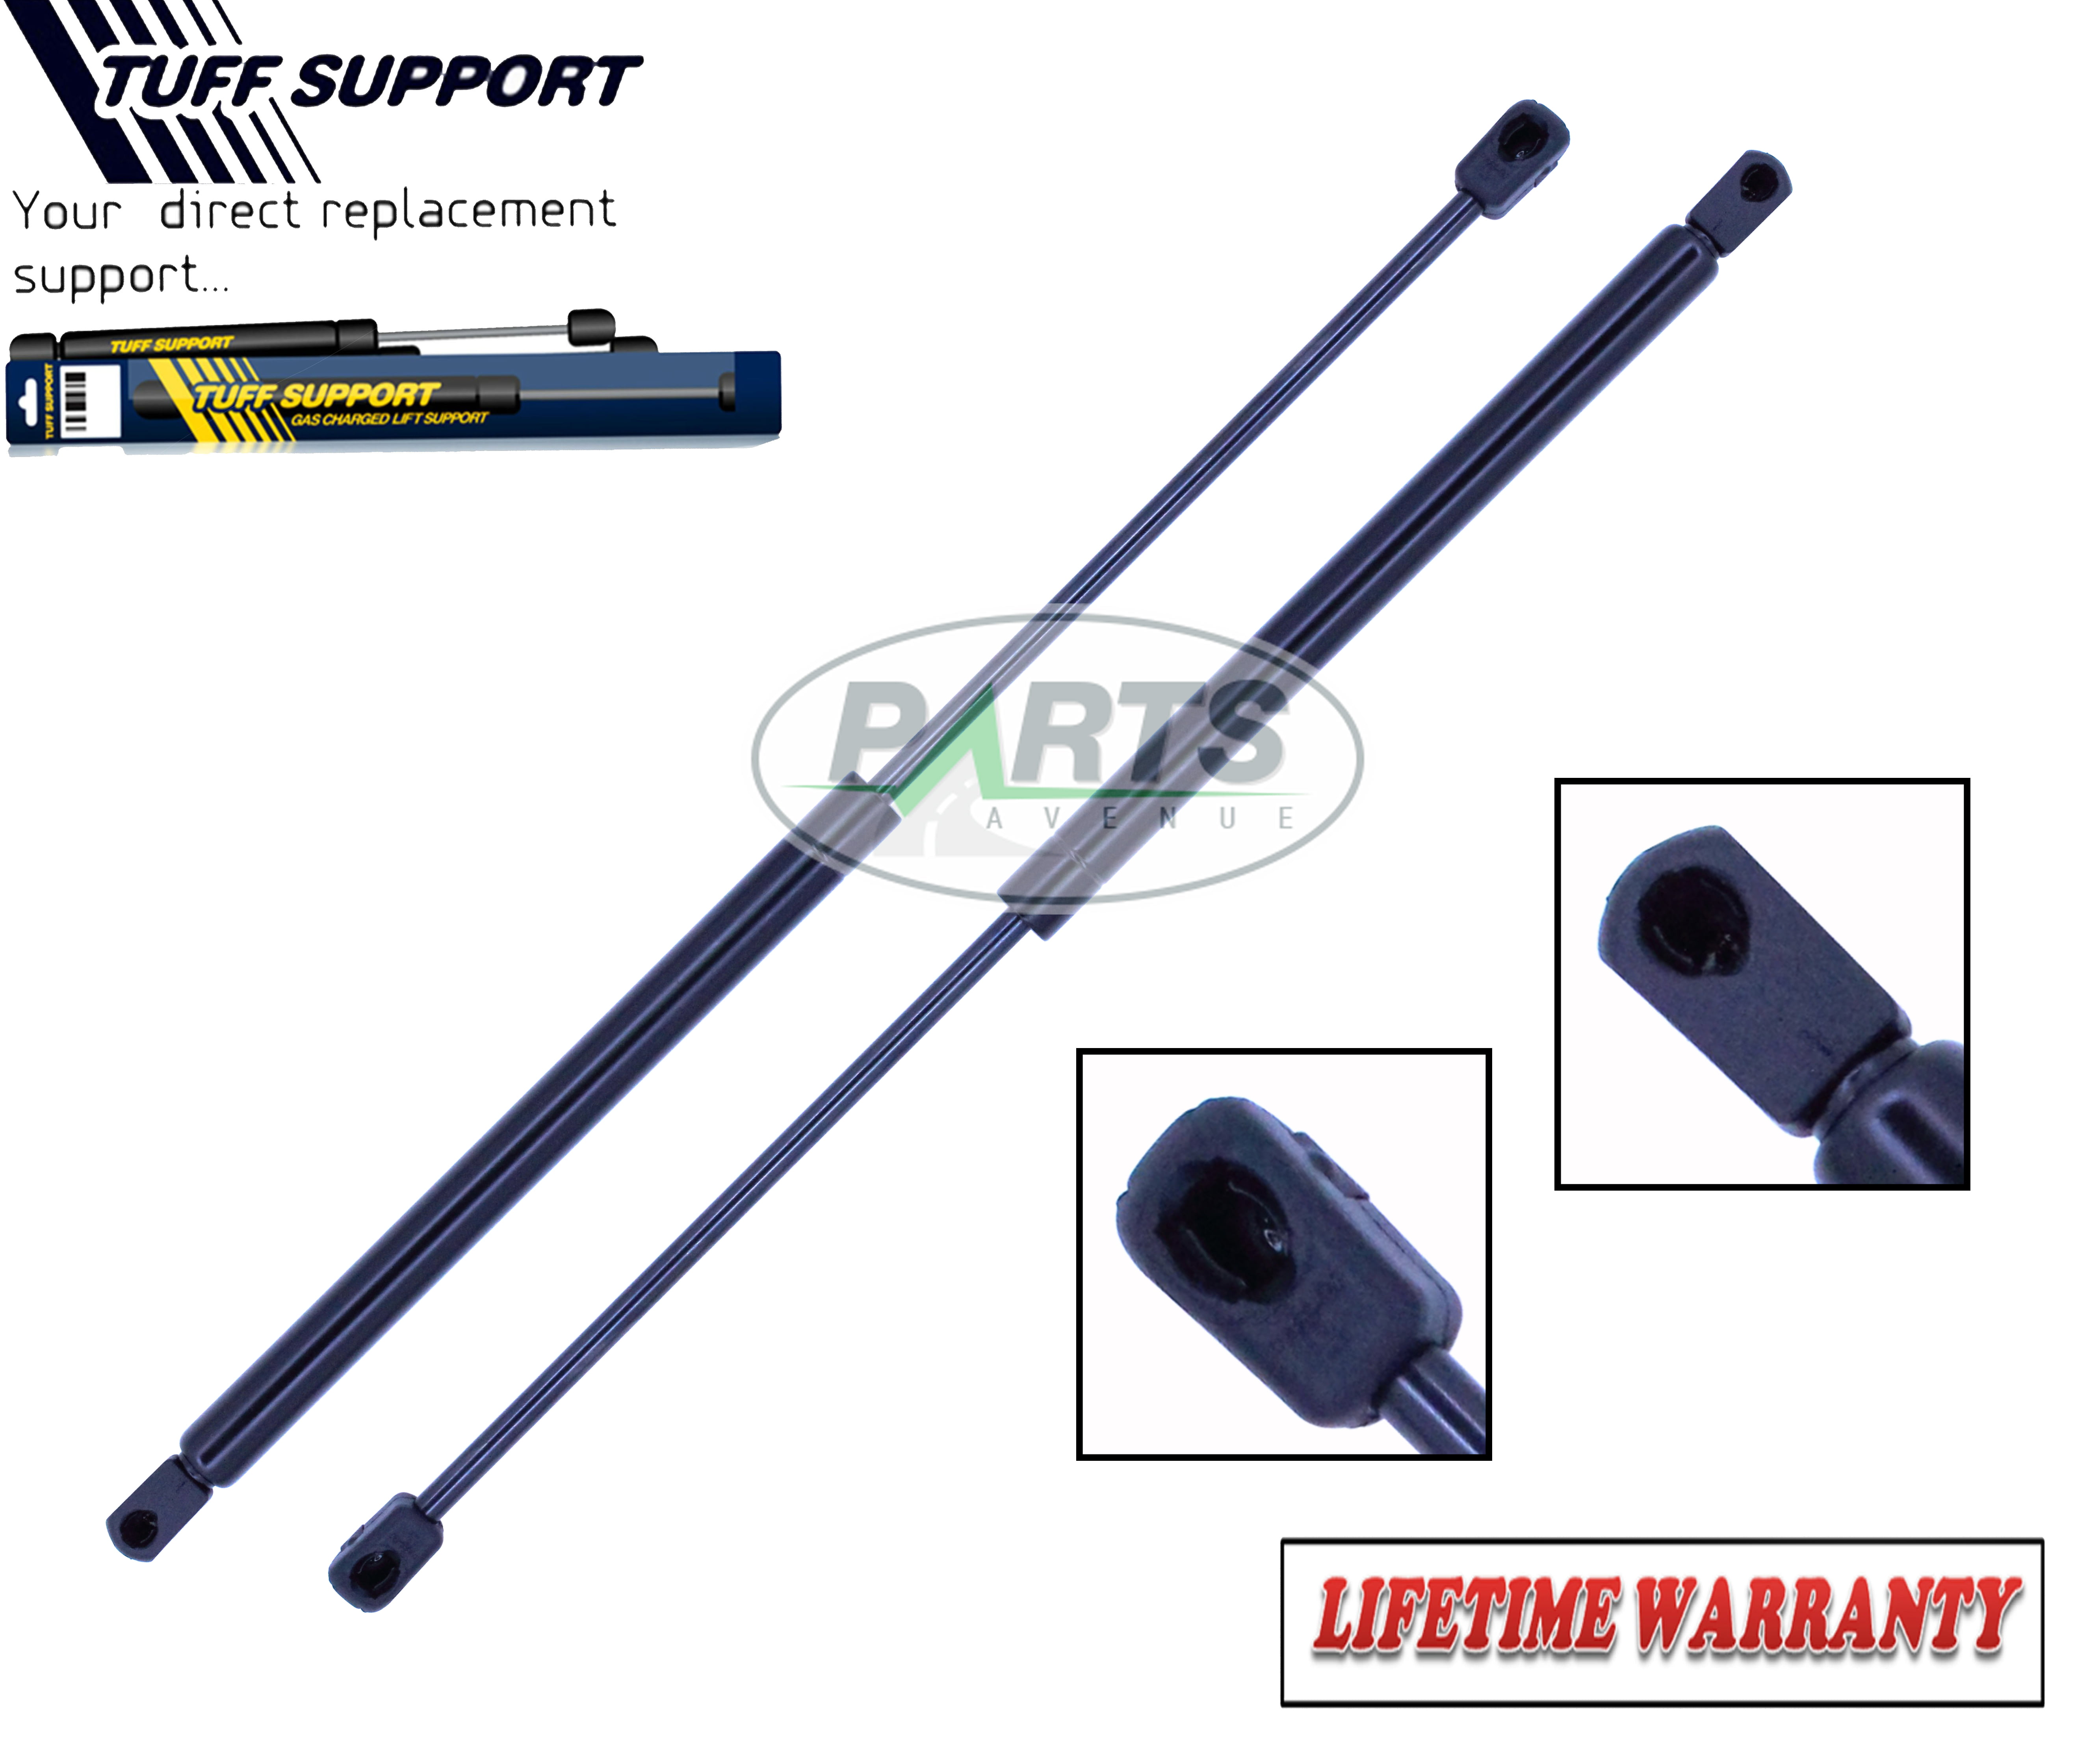 2 Pieces Hood Lift Supports 2002 TO 2007 Dodge RAM 1500 2500 3500 by Tuff Support SET 